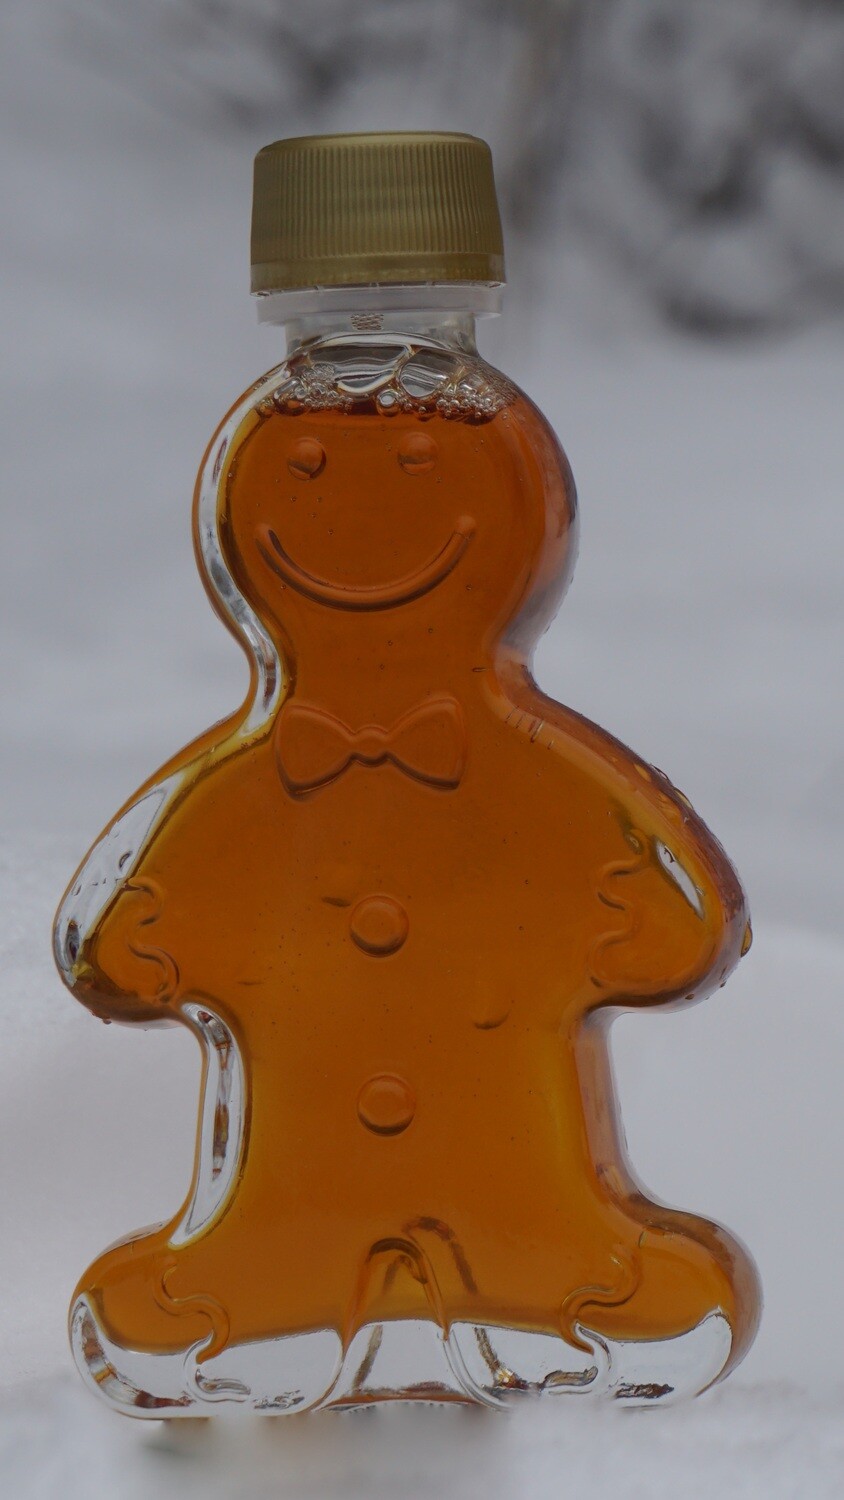 Maple Syrup in Gingerbread Person Bottles - Judd's Wayeeses Farms